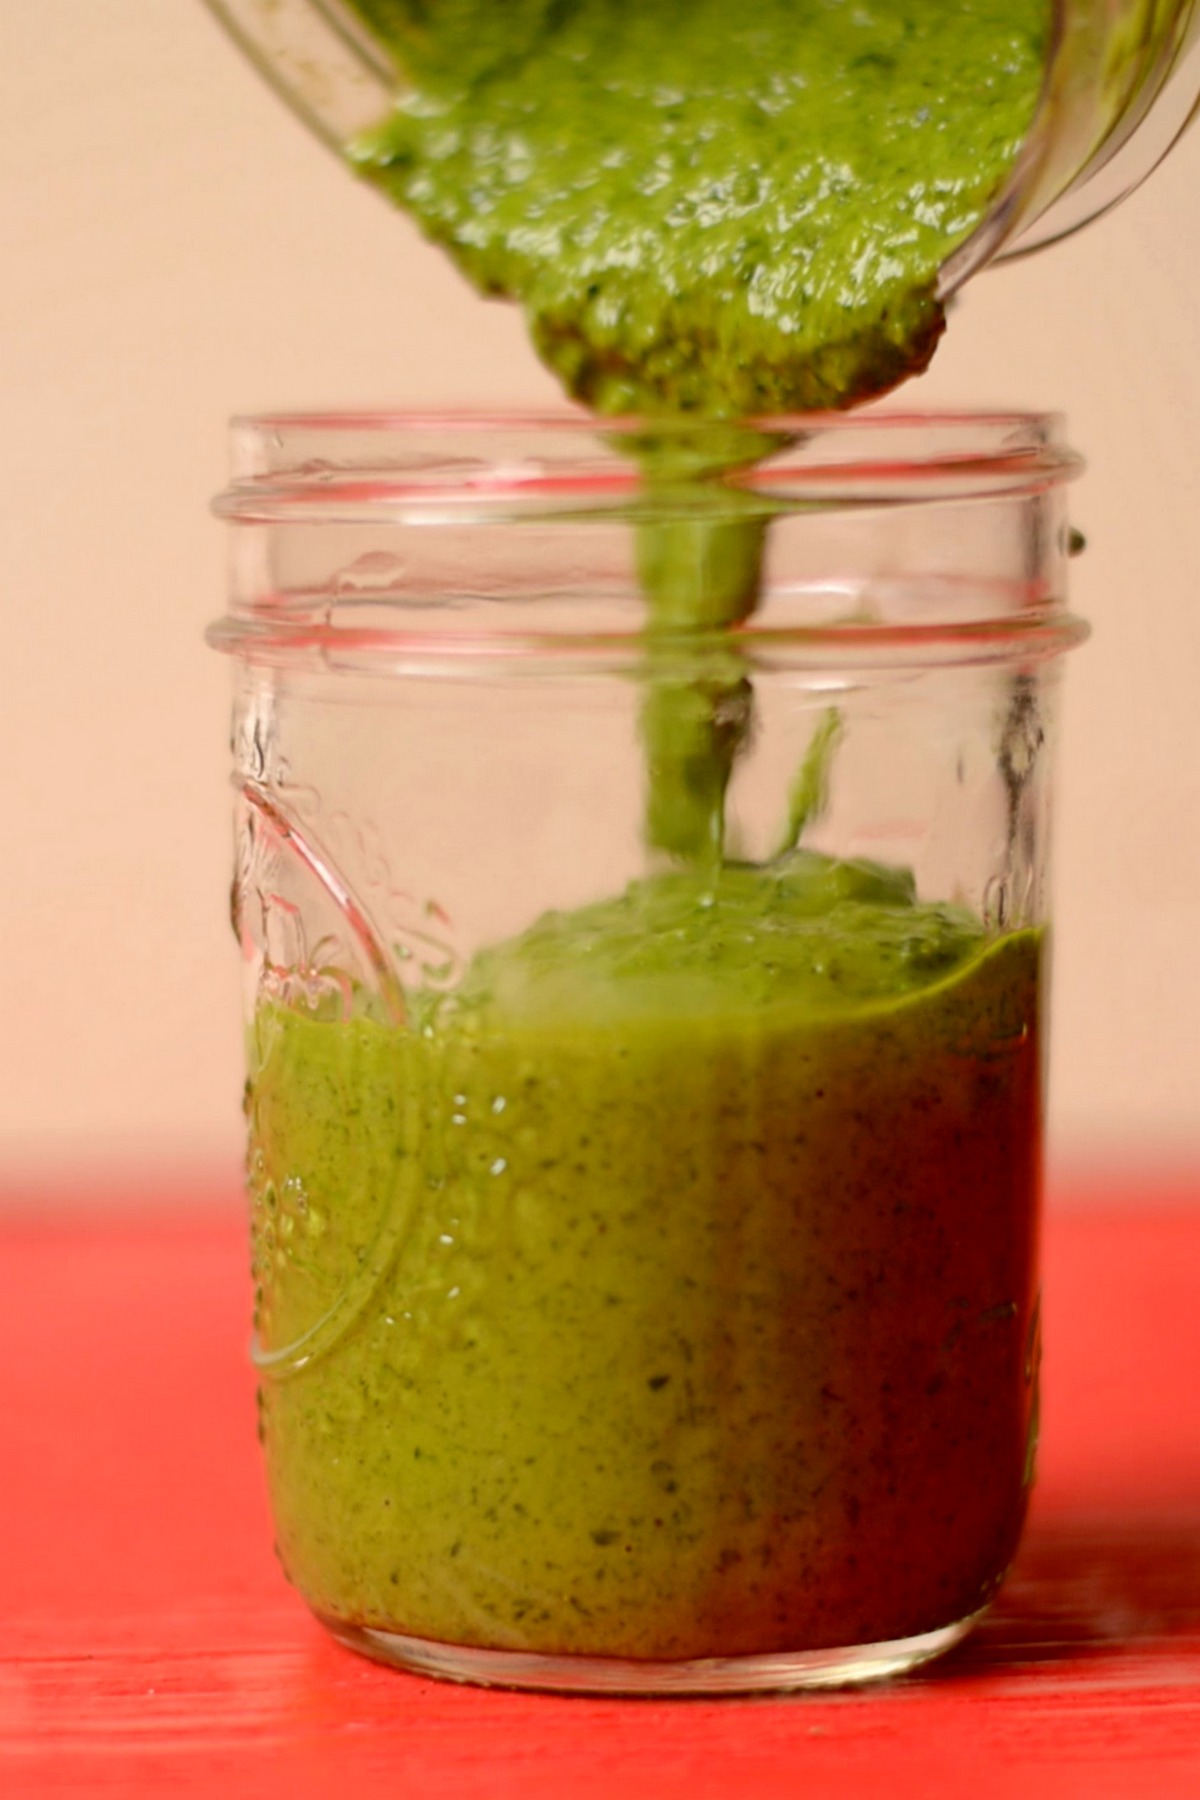 Chimichurri sauce being poured into a glass jar.